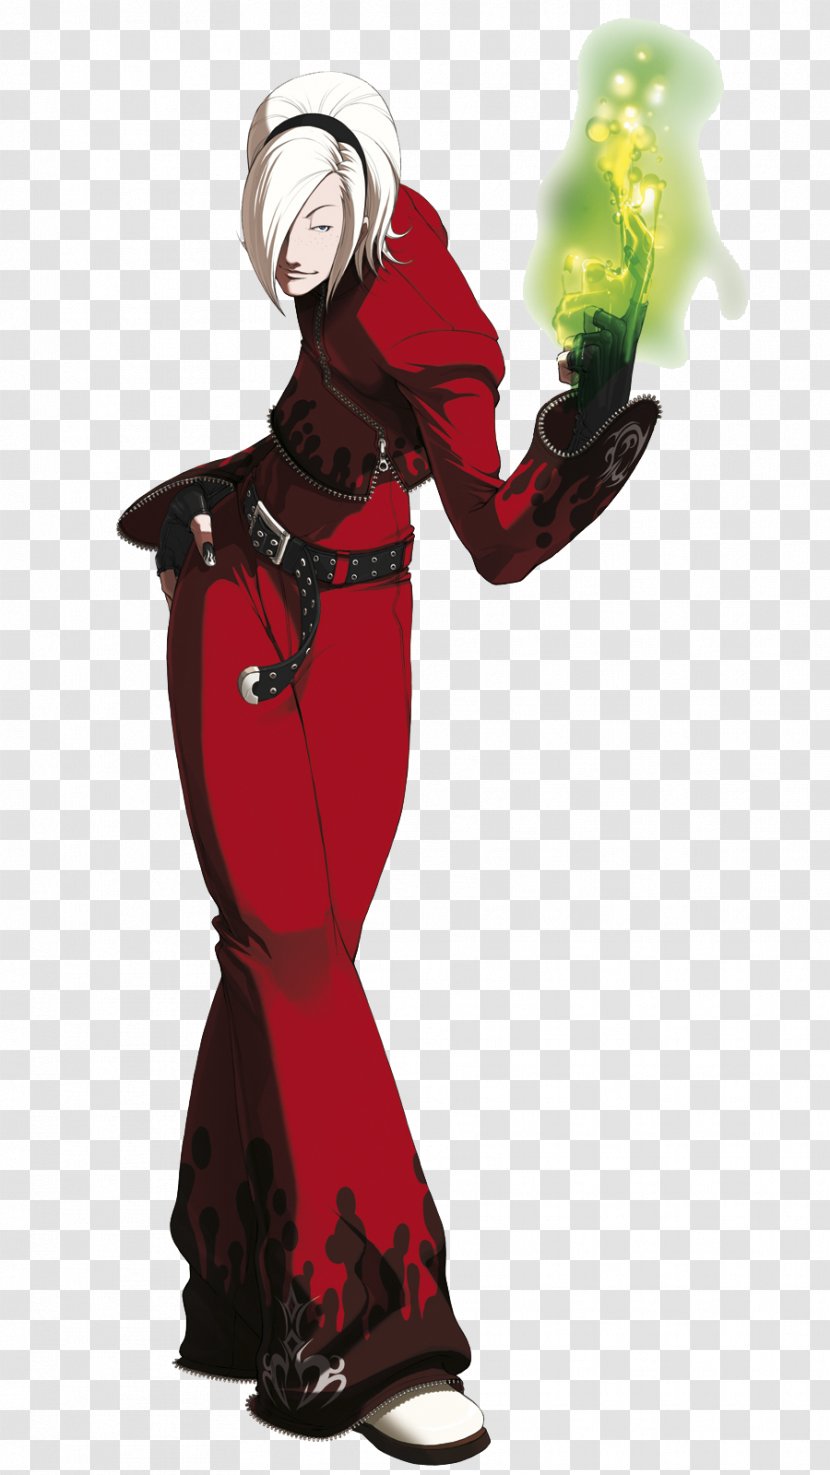 The King Of Fighters 2003 2002 XIII Fighters: Maximum Impact Ash Crimson - Costume Design - Fighter Transparent PNG